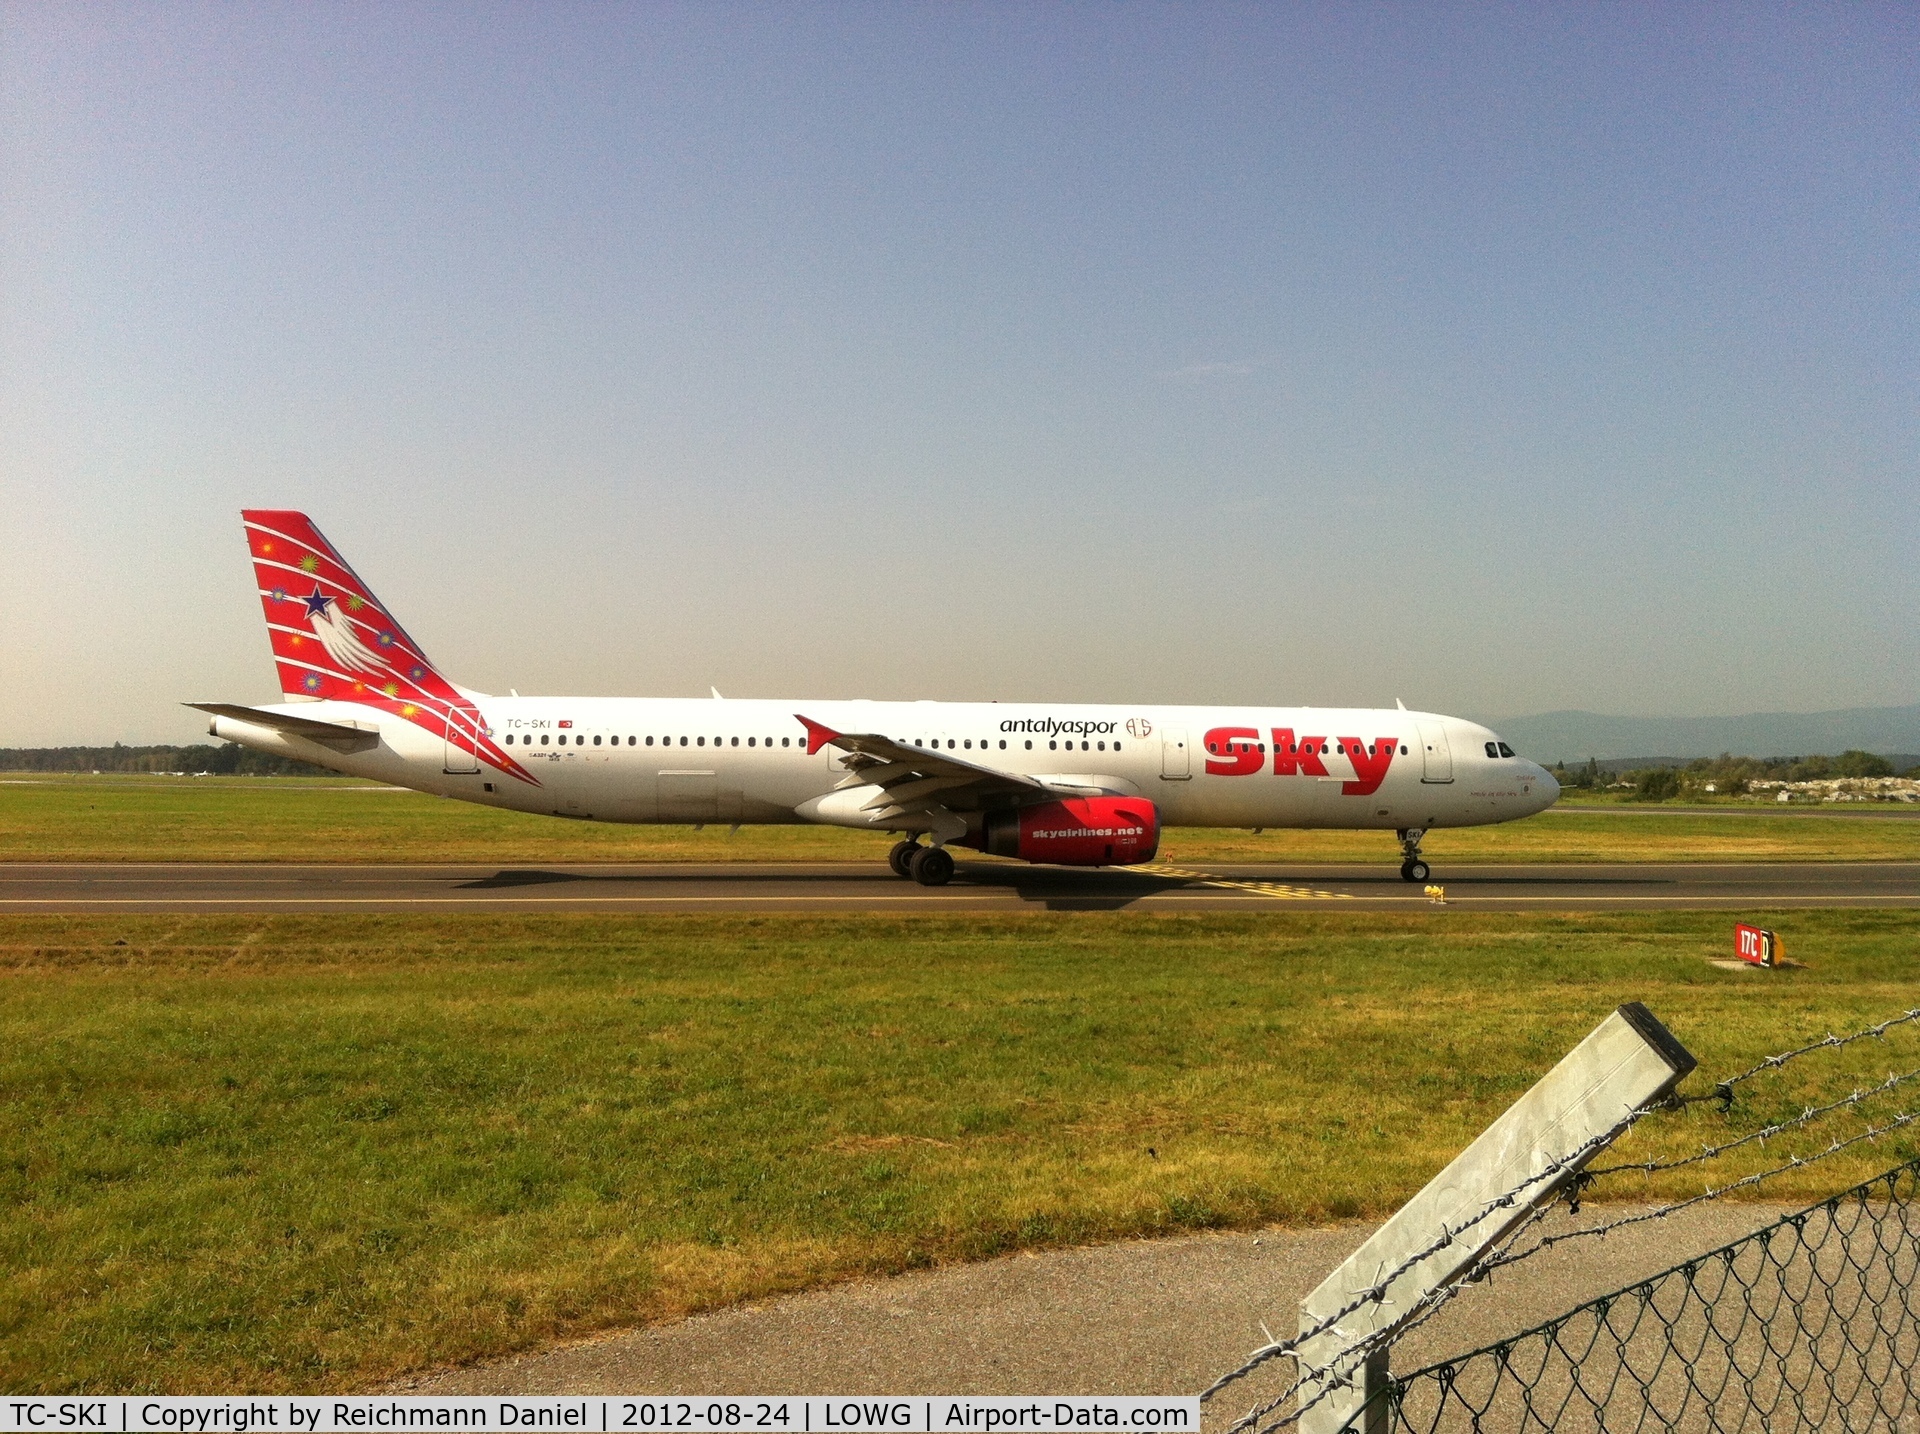 TC-SKI, 1998 Airbus A321-231 C/N 0811, Morning charter to Antalya with special sticker for Antalyaspor football team :)